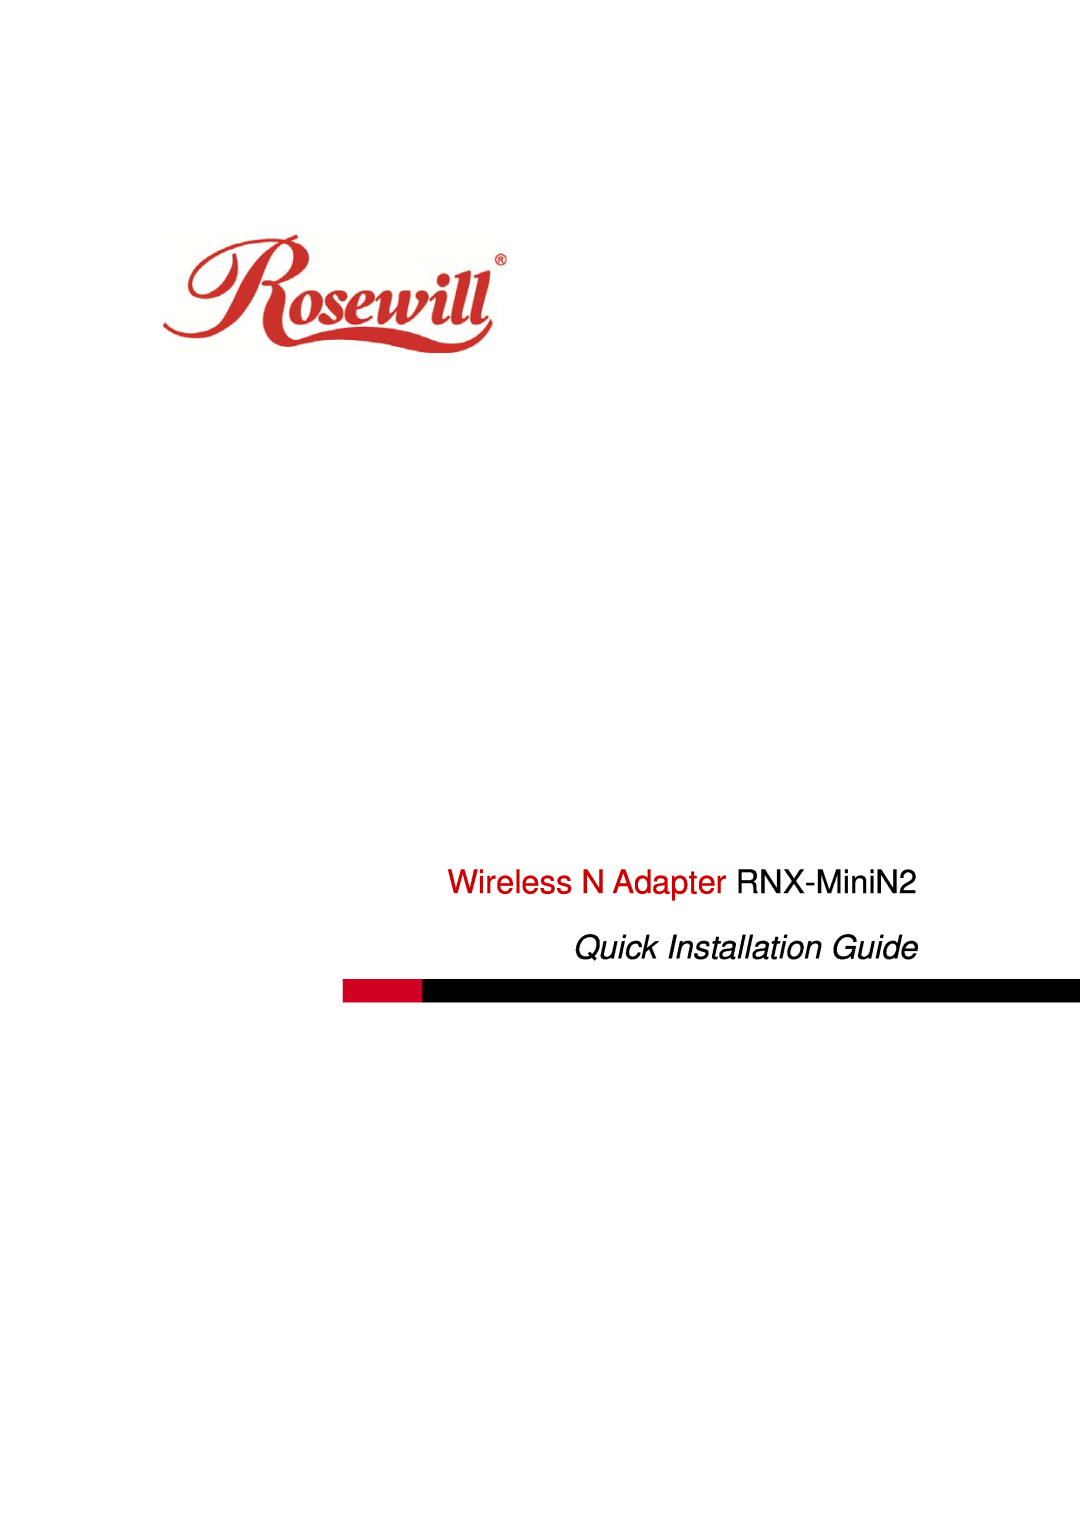 Rosewill manual Wireless N Adapter RNX-MiniN2, Quick Installation Guide 